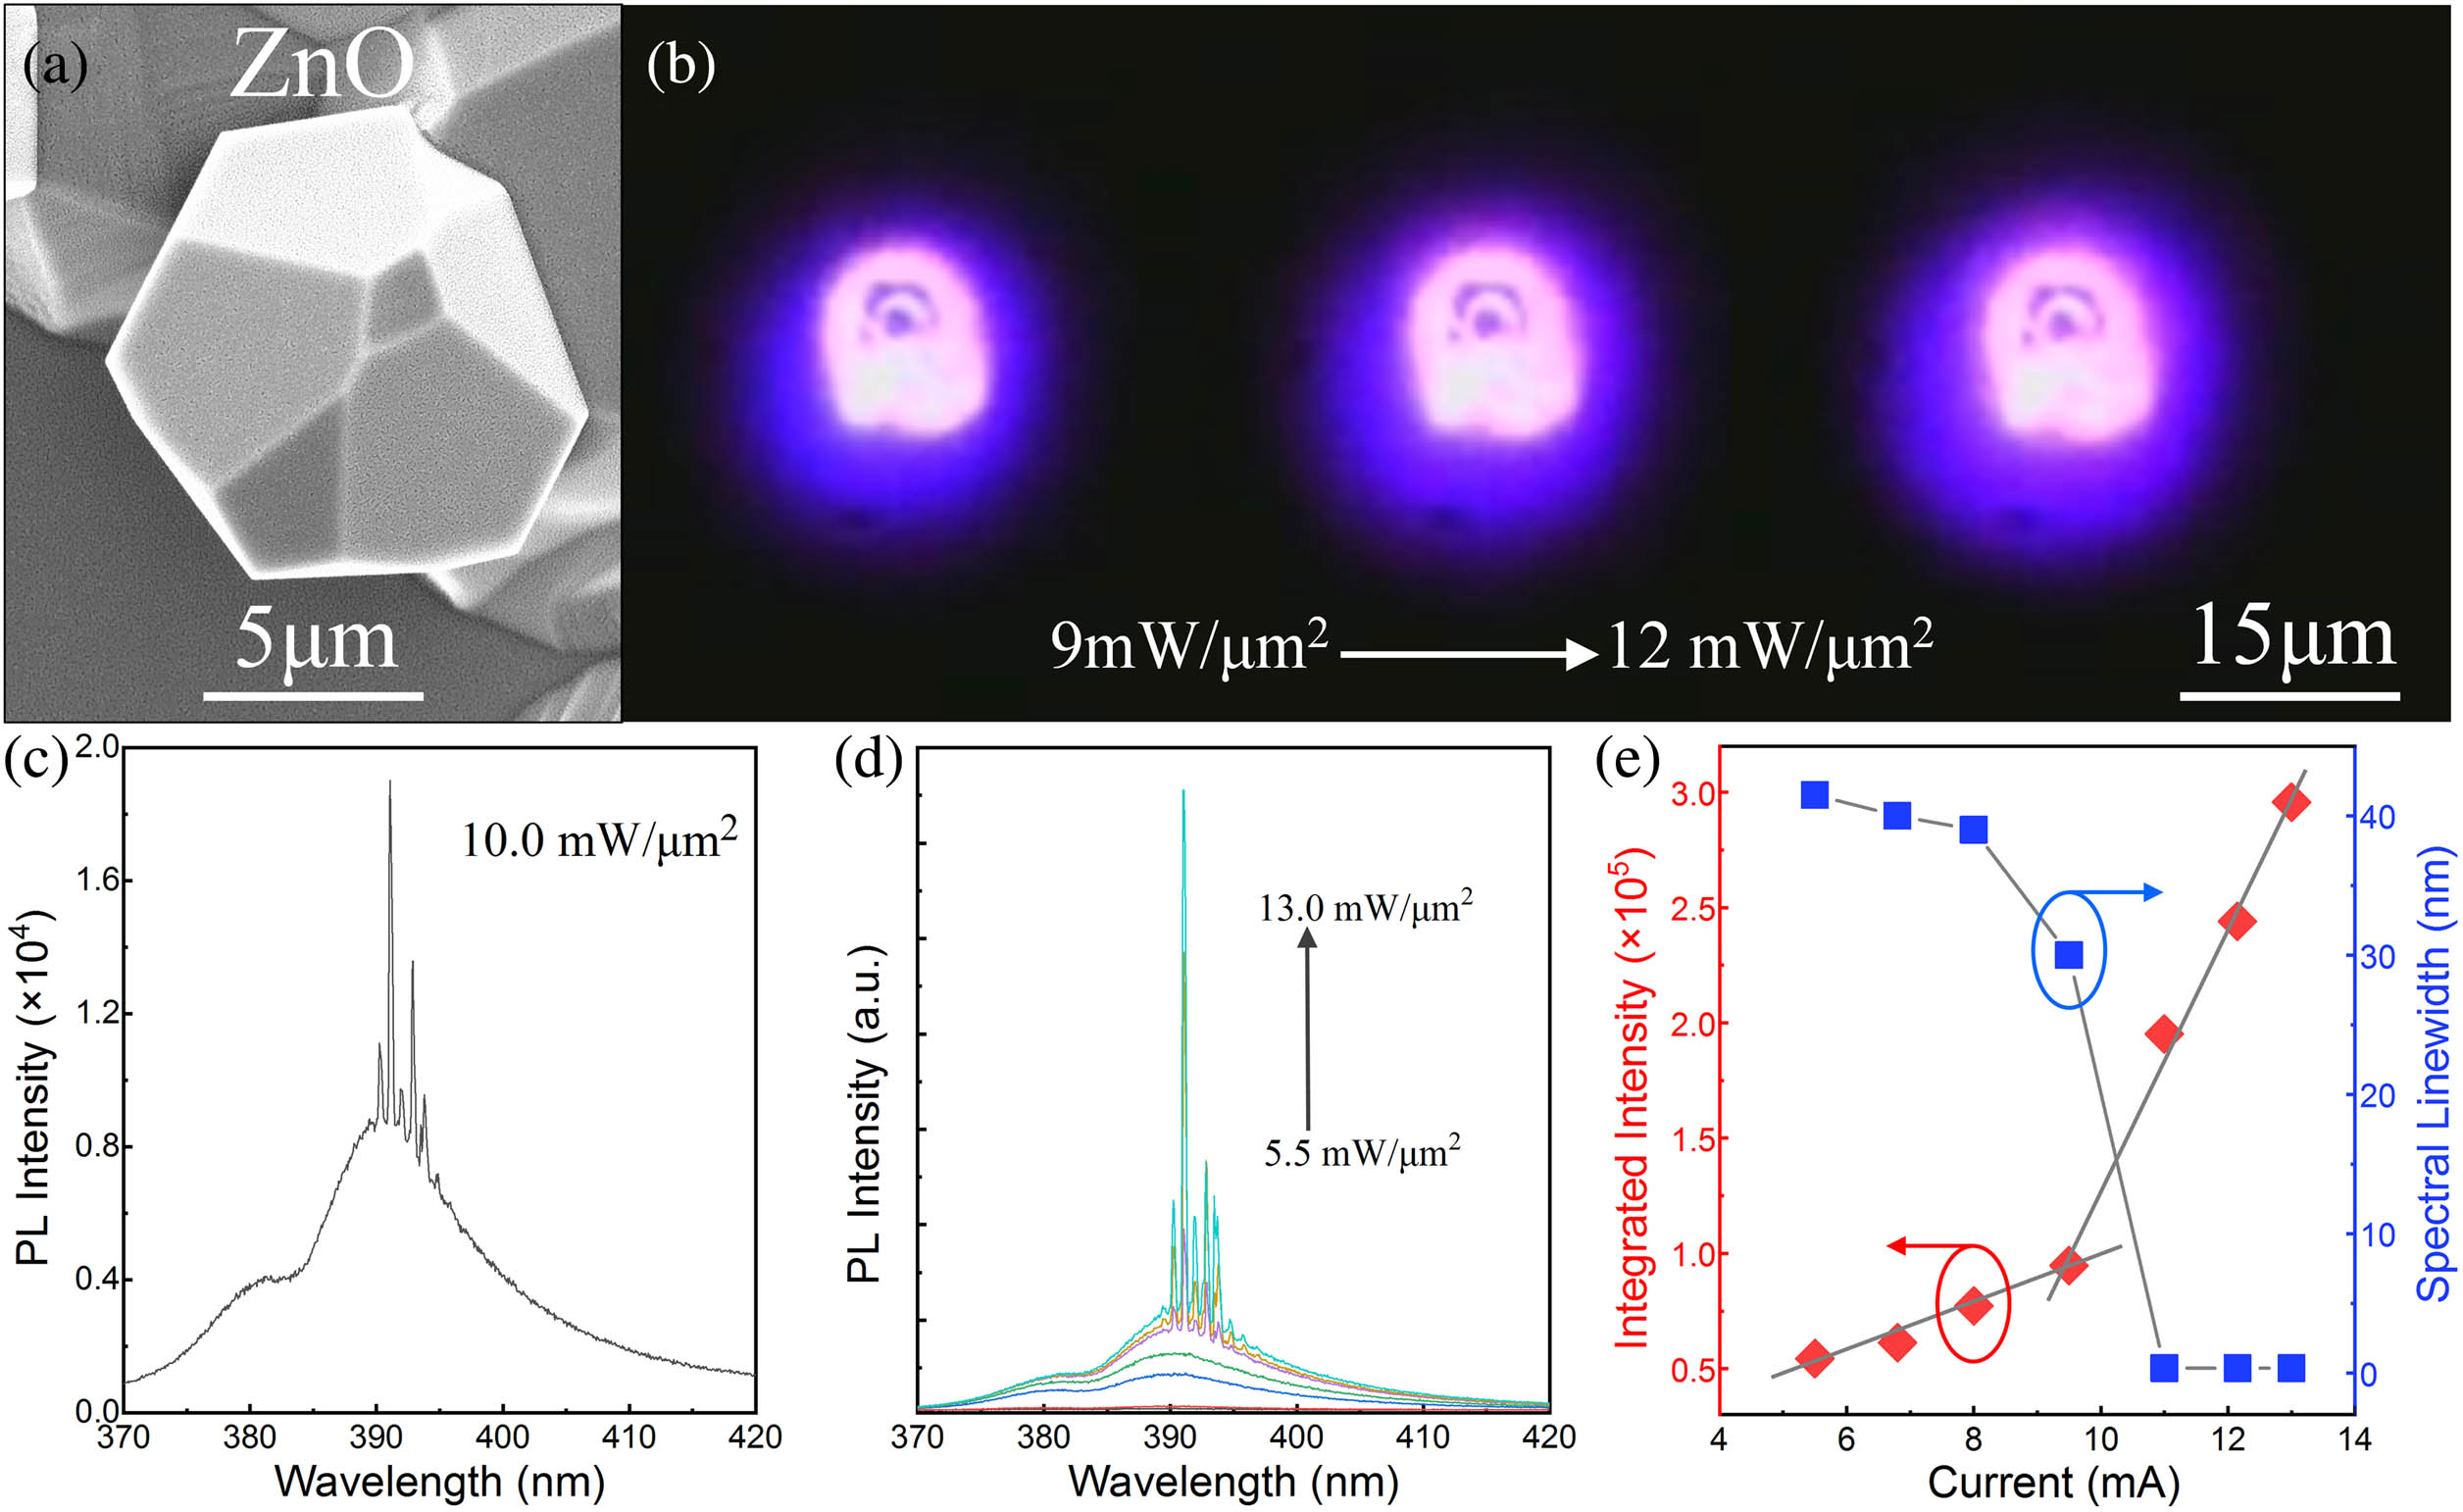 Optically pumped random lasing features from single ZnO MC. (a) SEM image of as-synthesized single ZnO MC. (b) Microscopic images of light emission from optically pumped single ZnO MC, with the excitation power density ranging from 9.0 to 12.0 mW/μm2. (c) Optically pumped lasing spectrum from single ZnO MC, with the excitation power density of 10 mW/μm2. (d) Optically pumped emission spectra from single ZnO MC, with the excitation power densities ranging from 5.5 to 13.0 mW/μm2. (e) Nonlinear relationship of integrated emission intensities as a function of the excitation power density, together with the spectral linewidth versus the excitation power density. The lasing threshold was extracted to be about 10.3 mW/μm2.